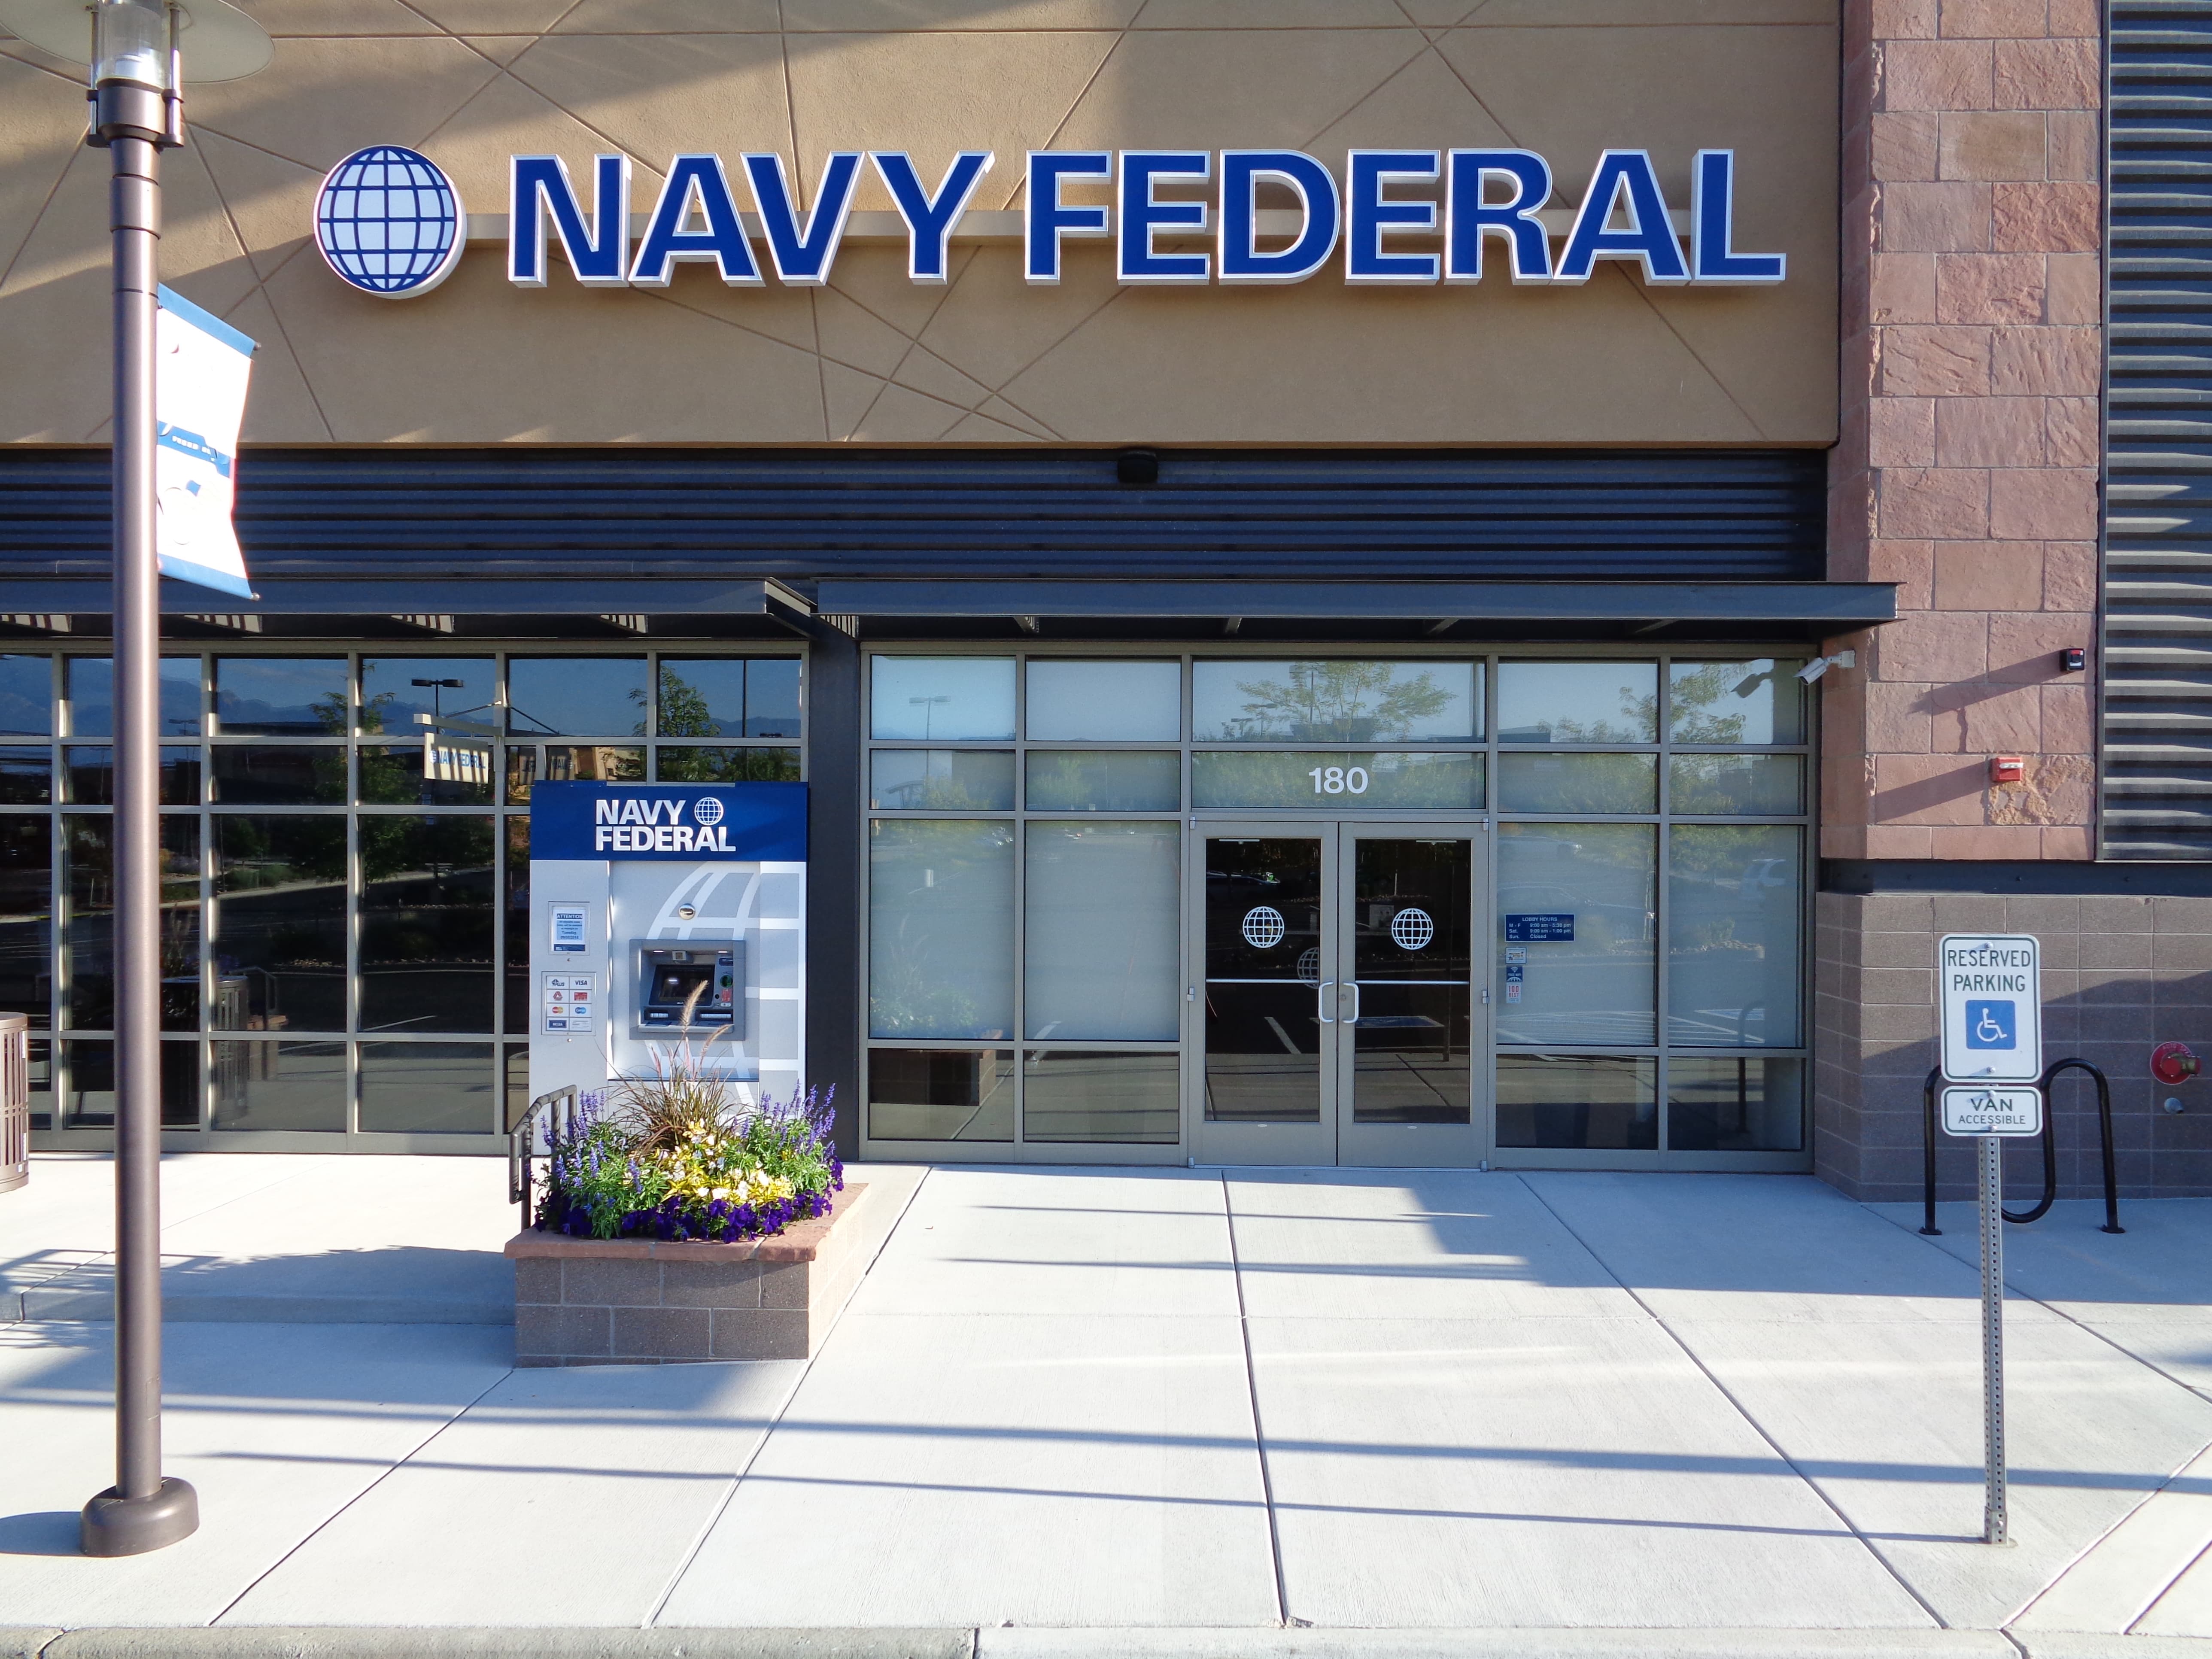 Navy Federal Credit Union Coupons near me in Colorado Springs, CO 80918 | 8coupons